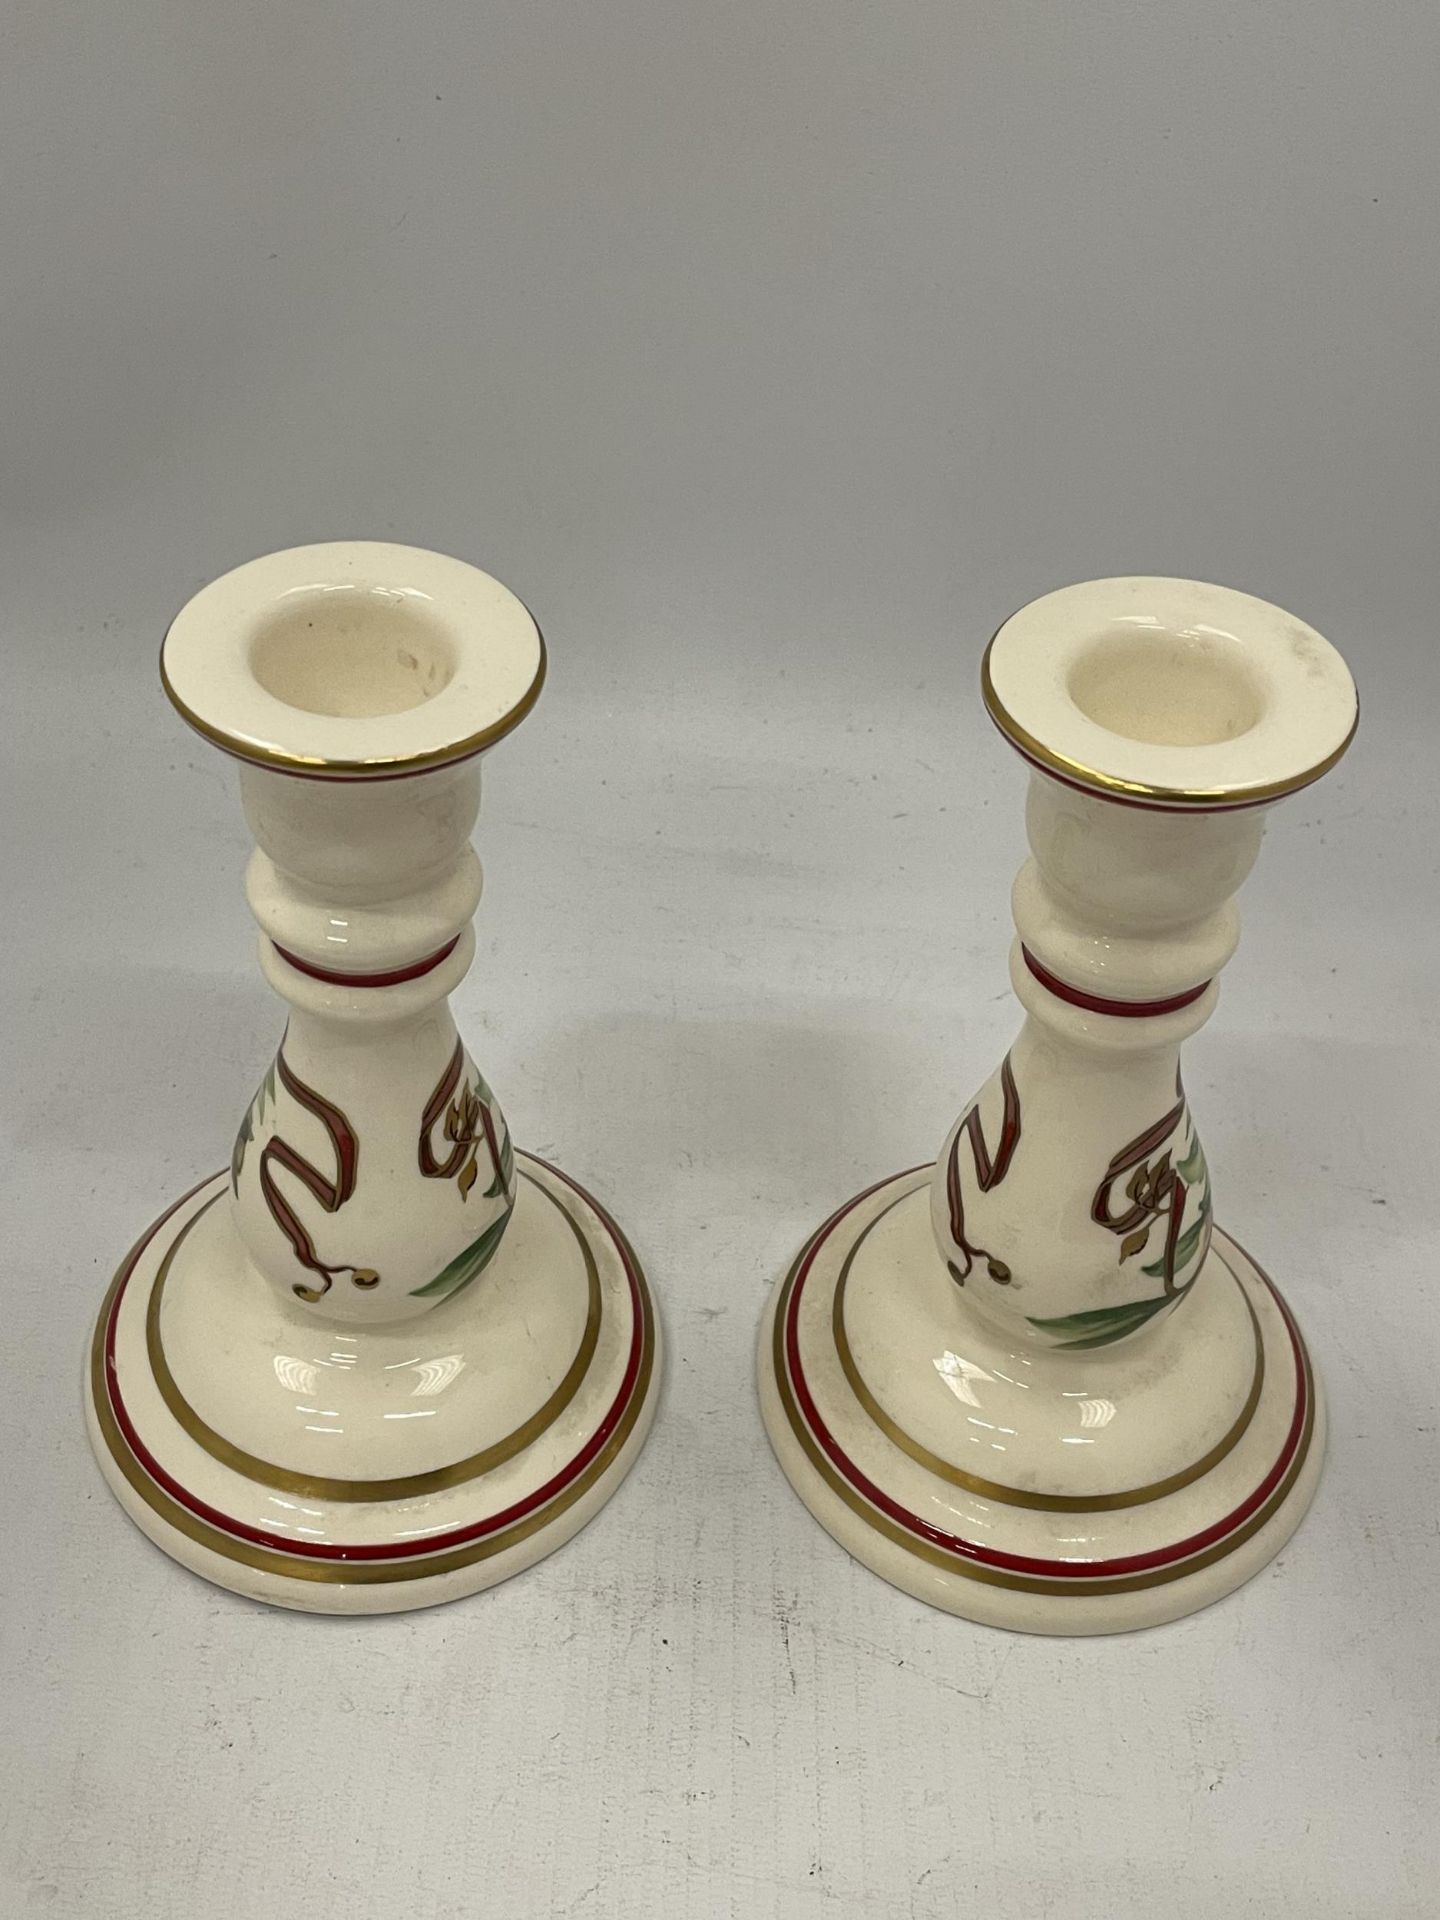 A PAIR OF TIFFANY & CO 'TIFFANY GARLAND' PATTERN CANDLESTICKS - Image 2 of 3